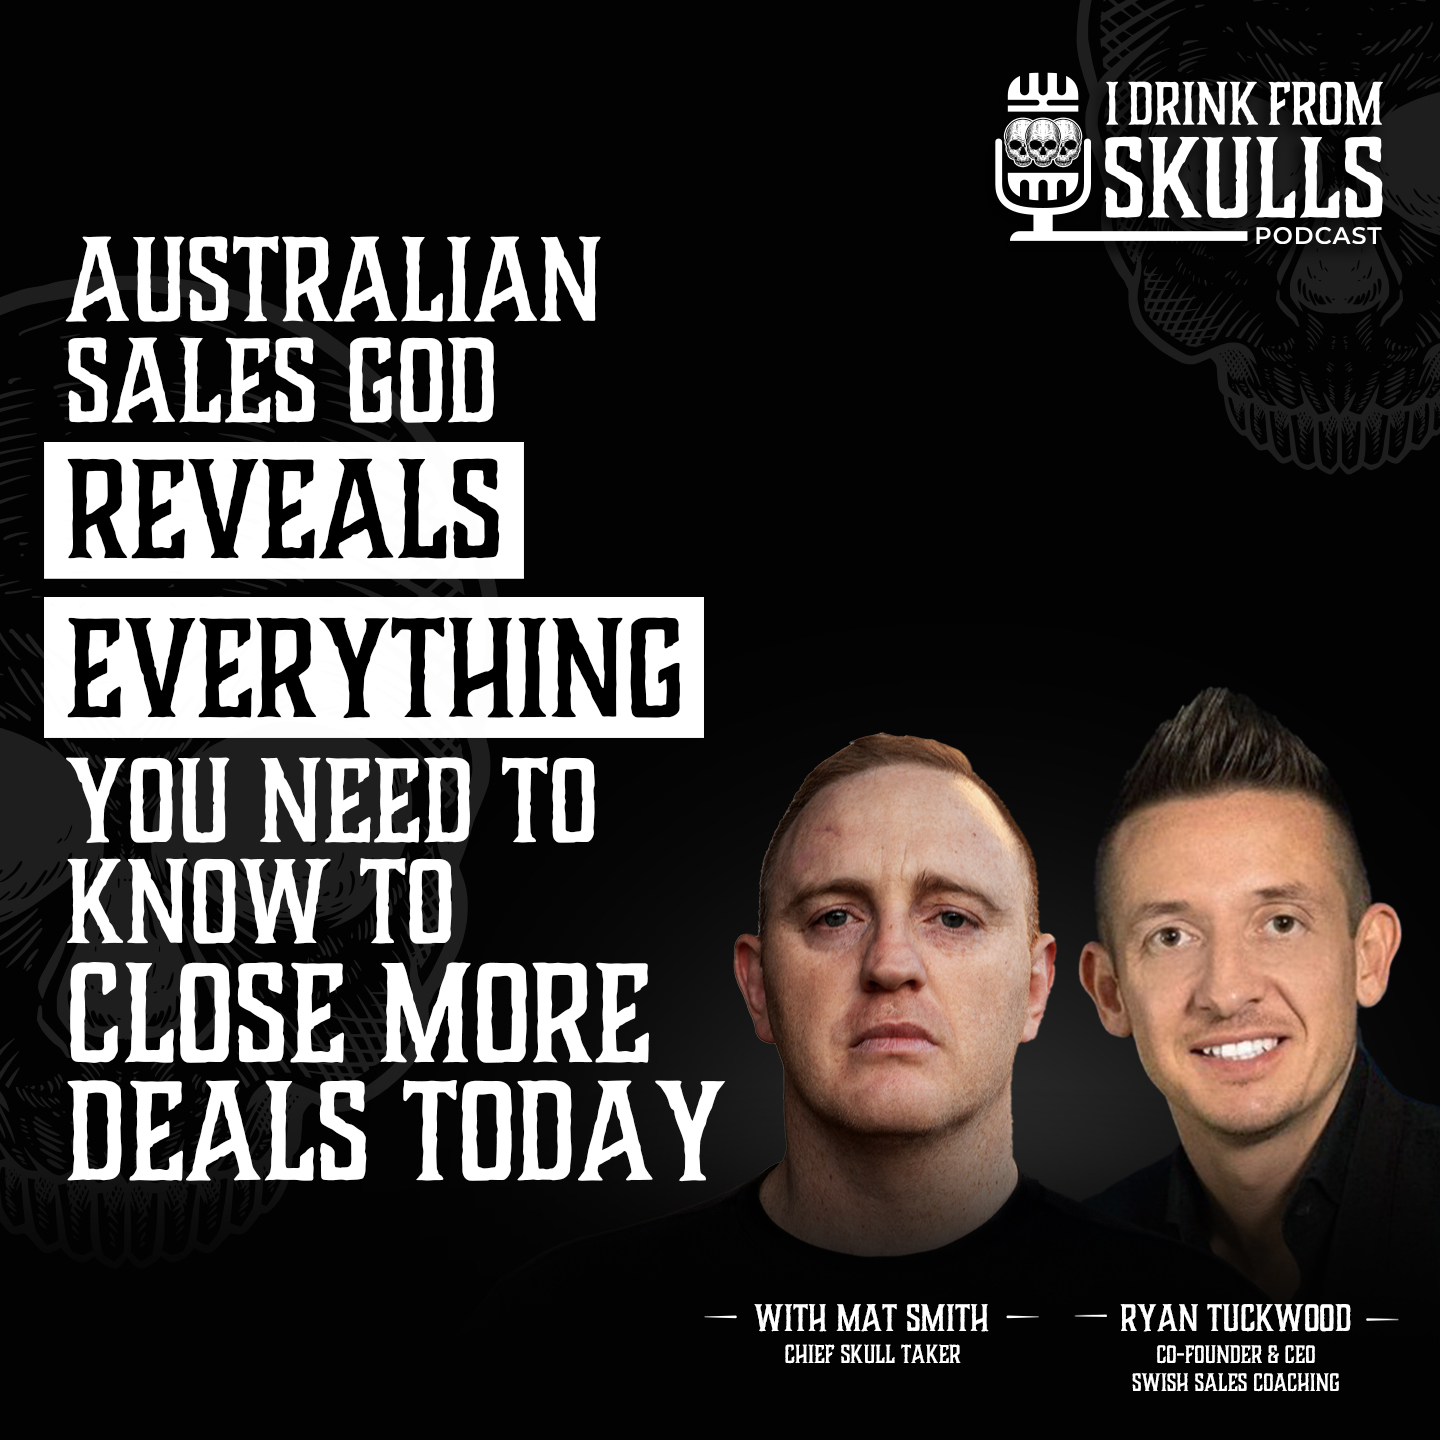 Australian Sales God Reveals Everything You Need To Know To Close More Deals Today